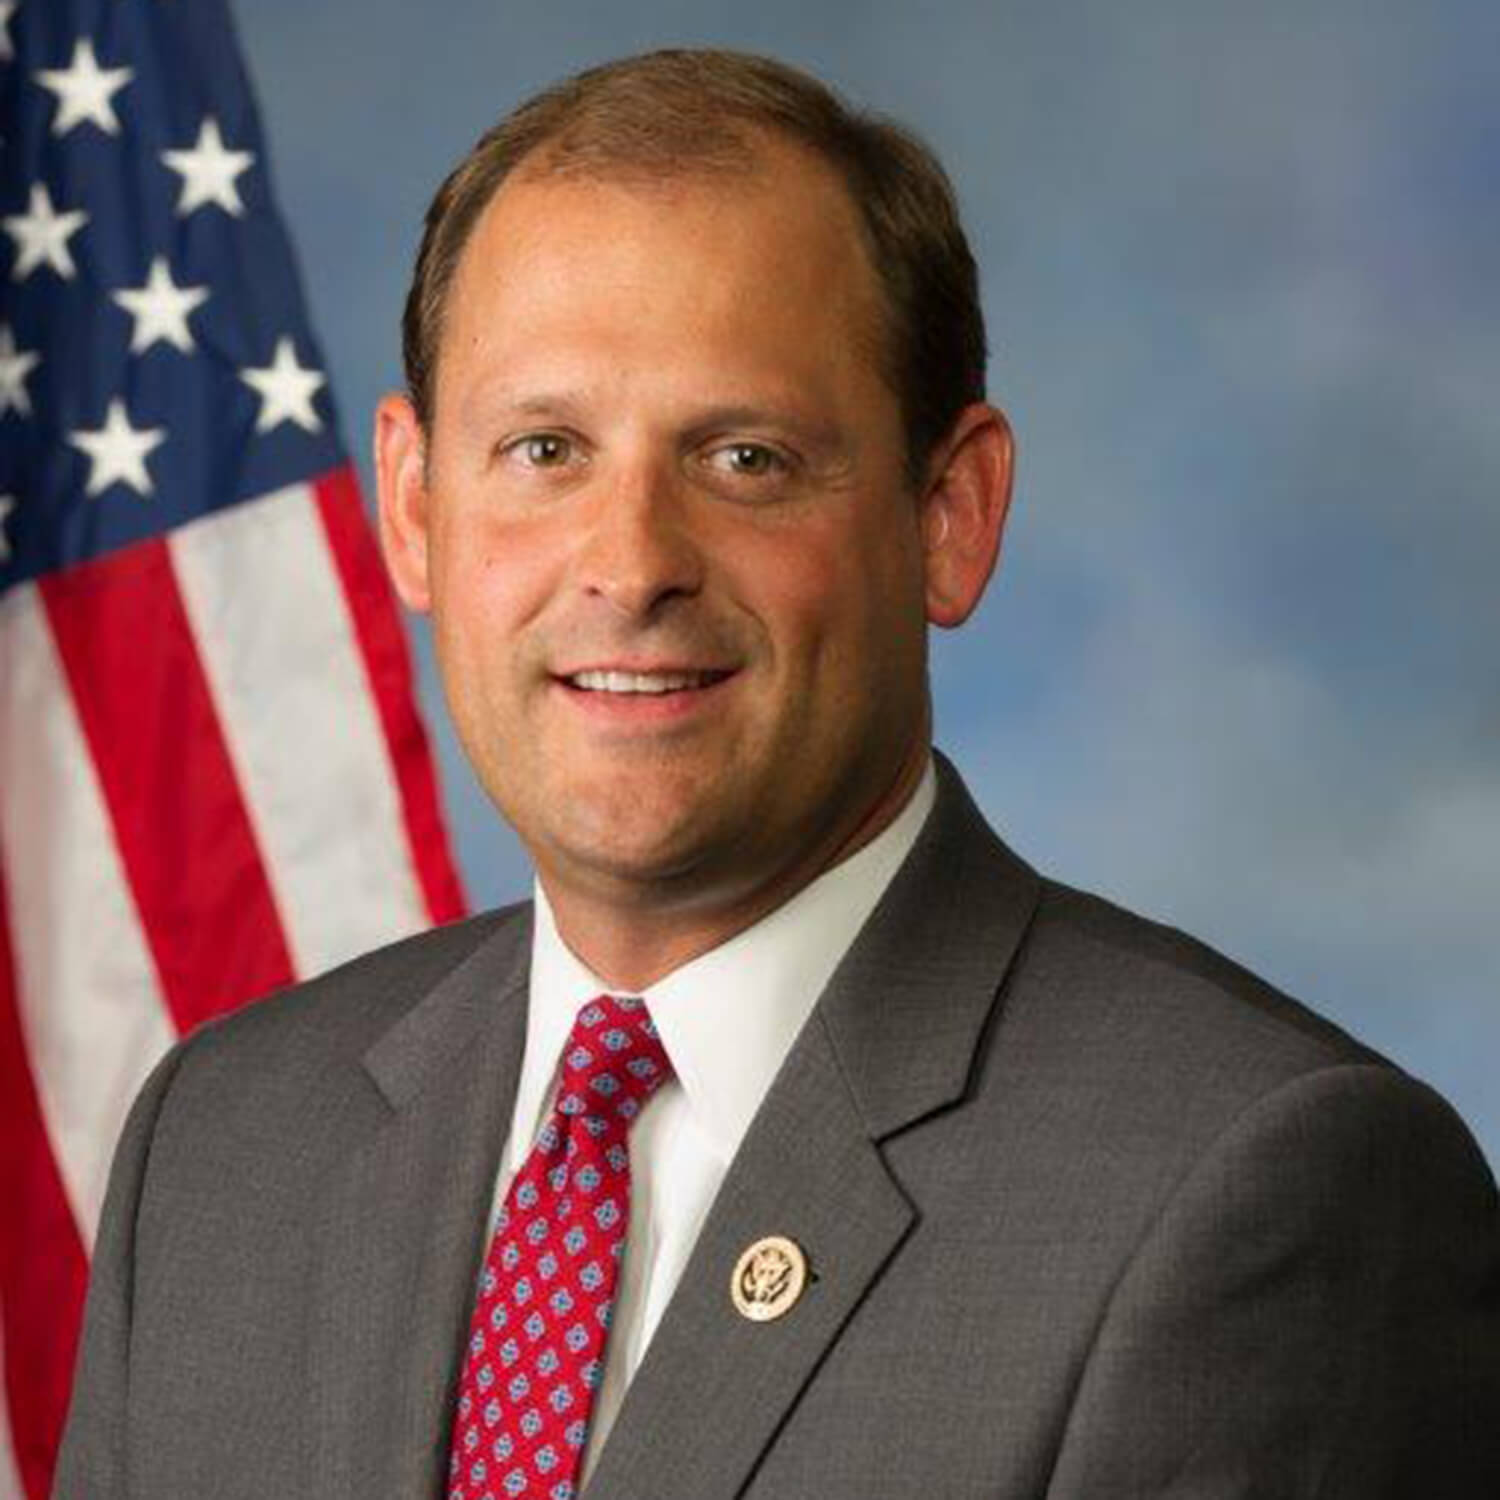 Rep. Andy Barr (R-Ky.)